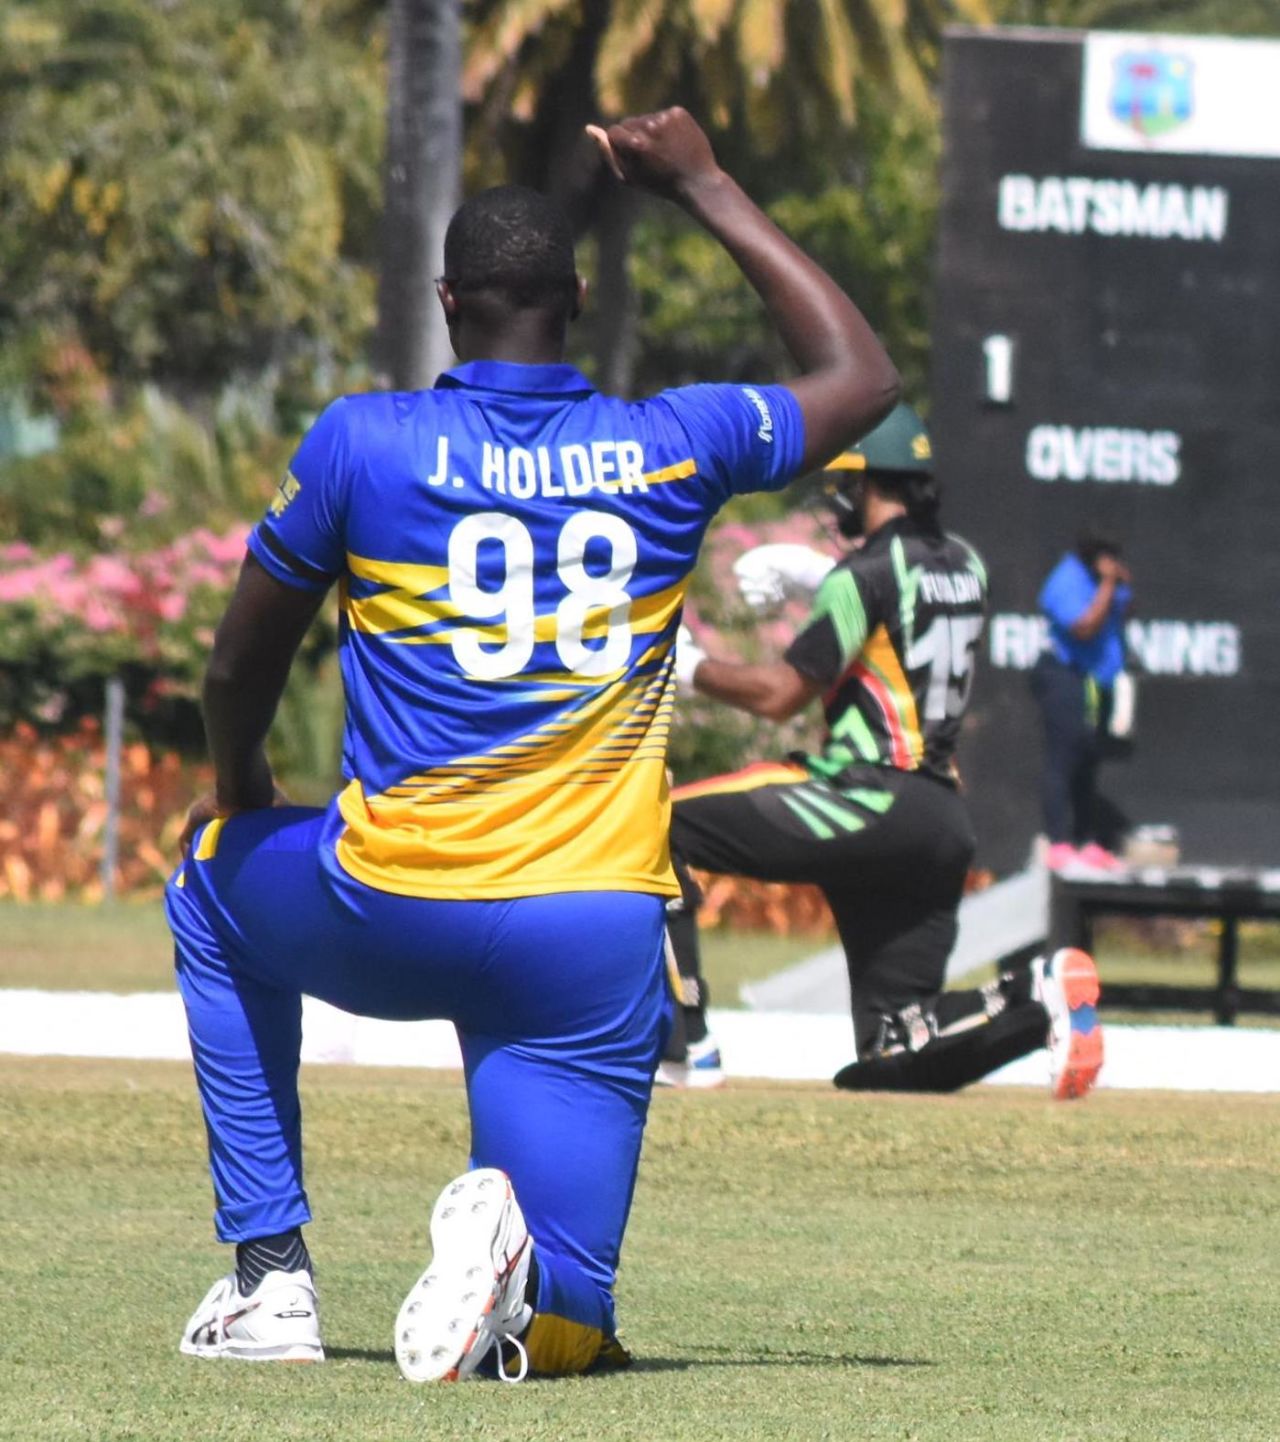 Jason Holder takes a knee before the start of the game, Guyana vs Barbados, Super50 Cup, Coolidge, February 8, 2021